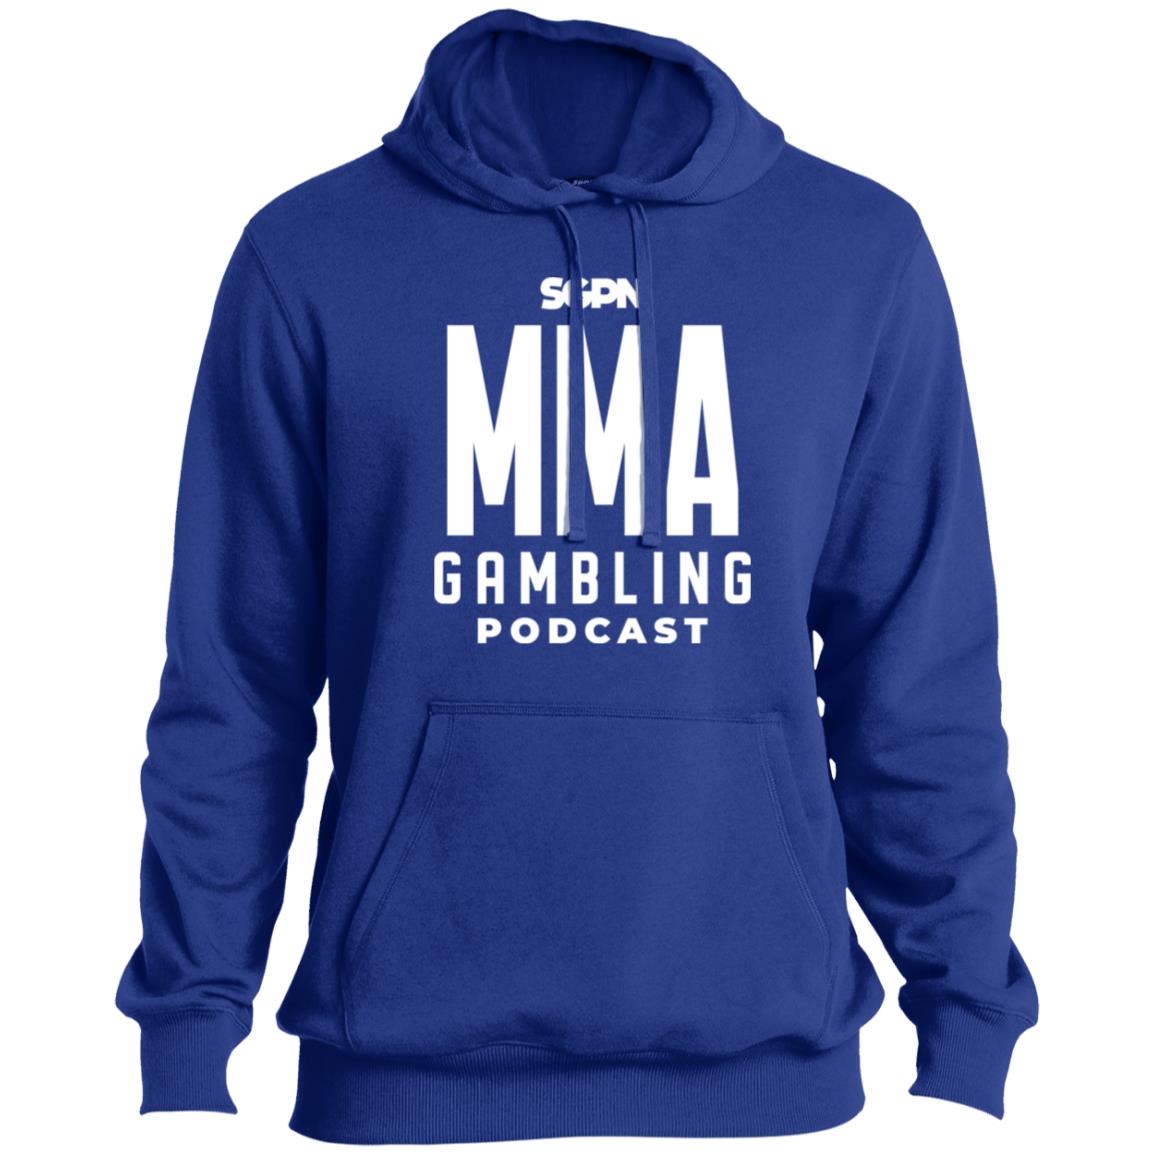 MMA Gambling Podcast Pullover Hoodie (White Logo)